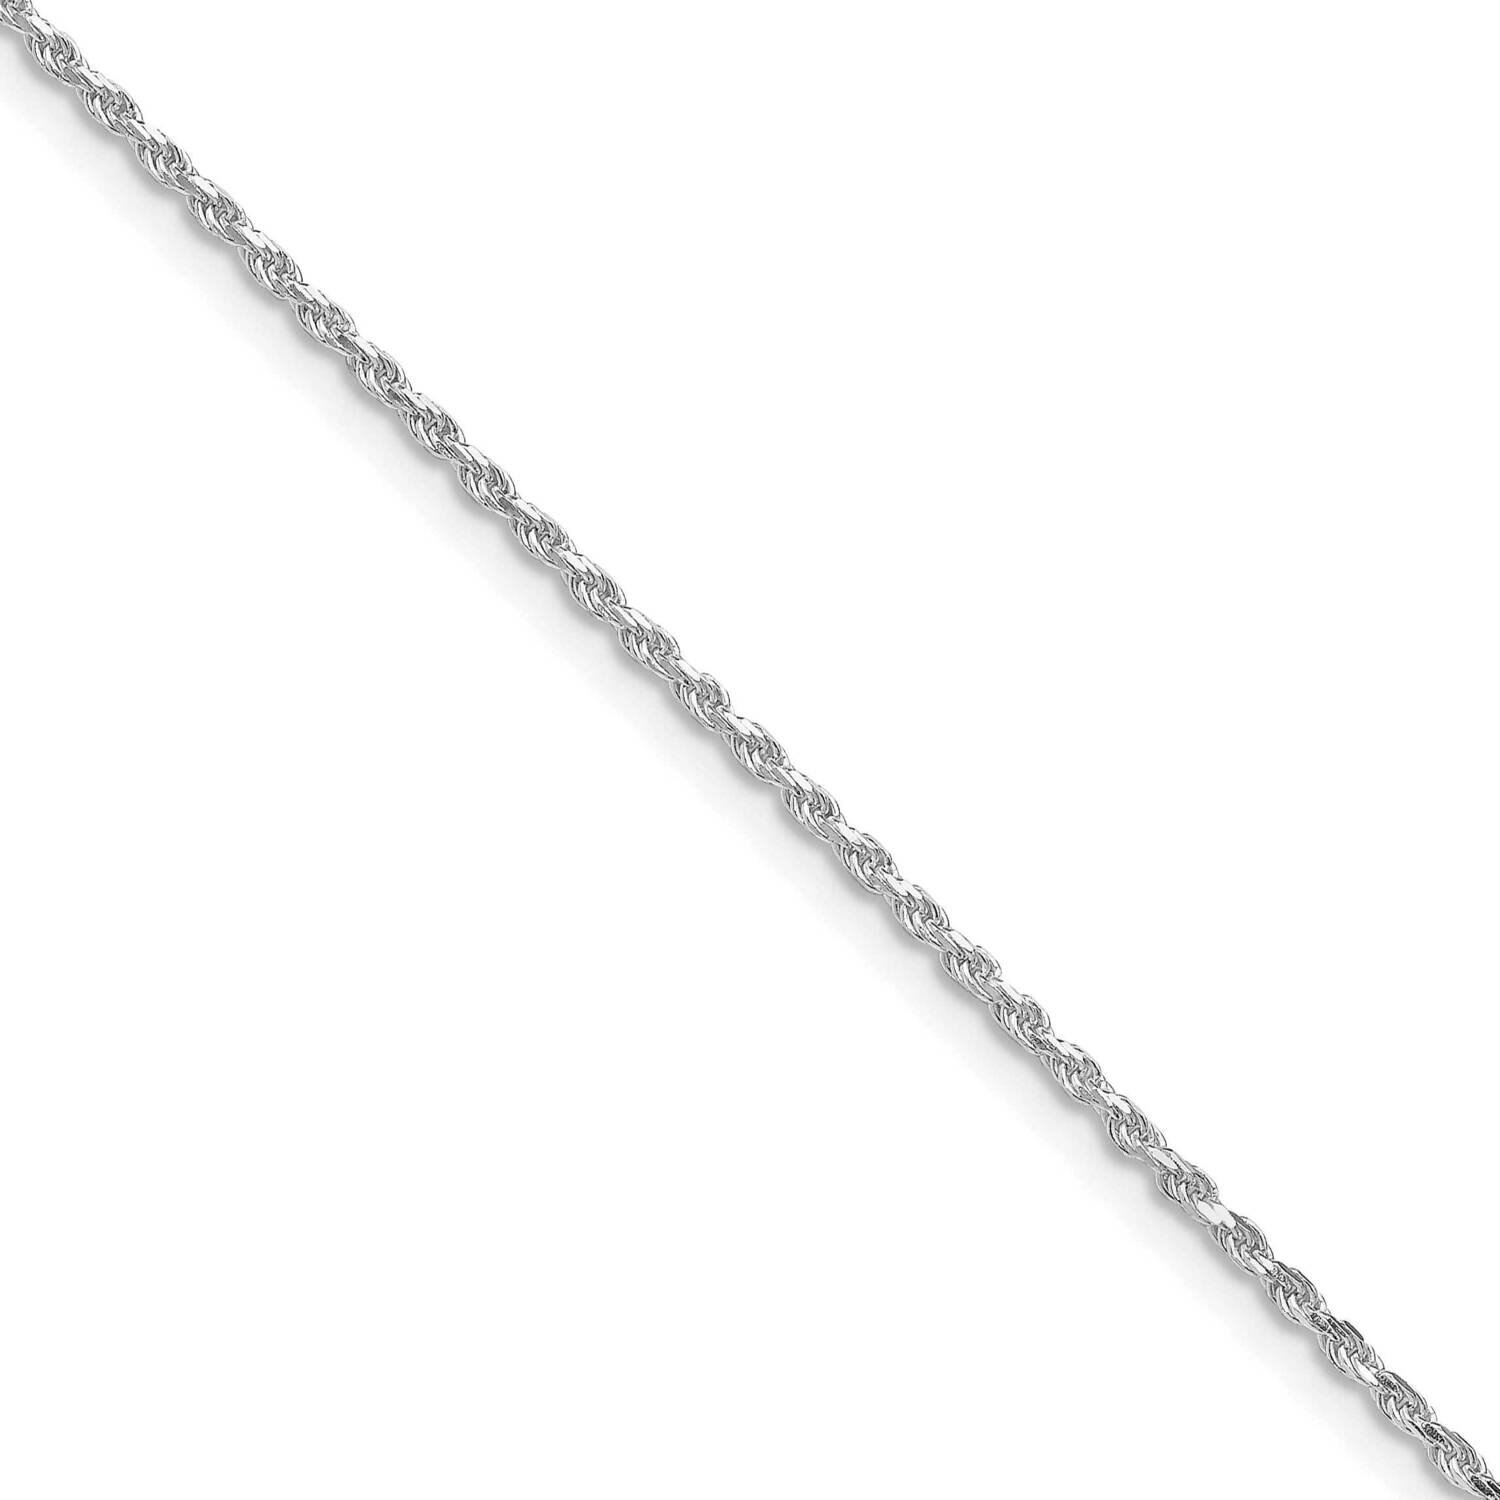 1.5mm Diamond-Cut Rope Chain Anklet 9 Inch Sterling Silver Rhodium-Plated QDC020R-9